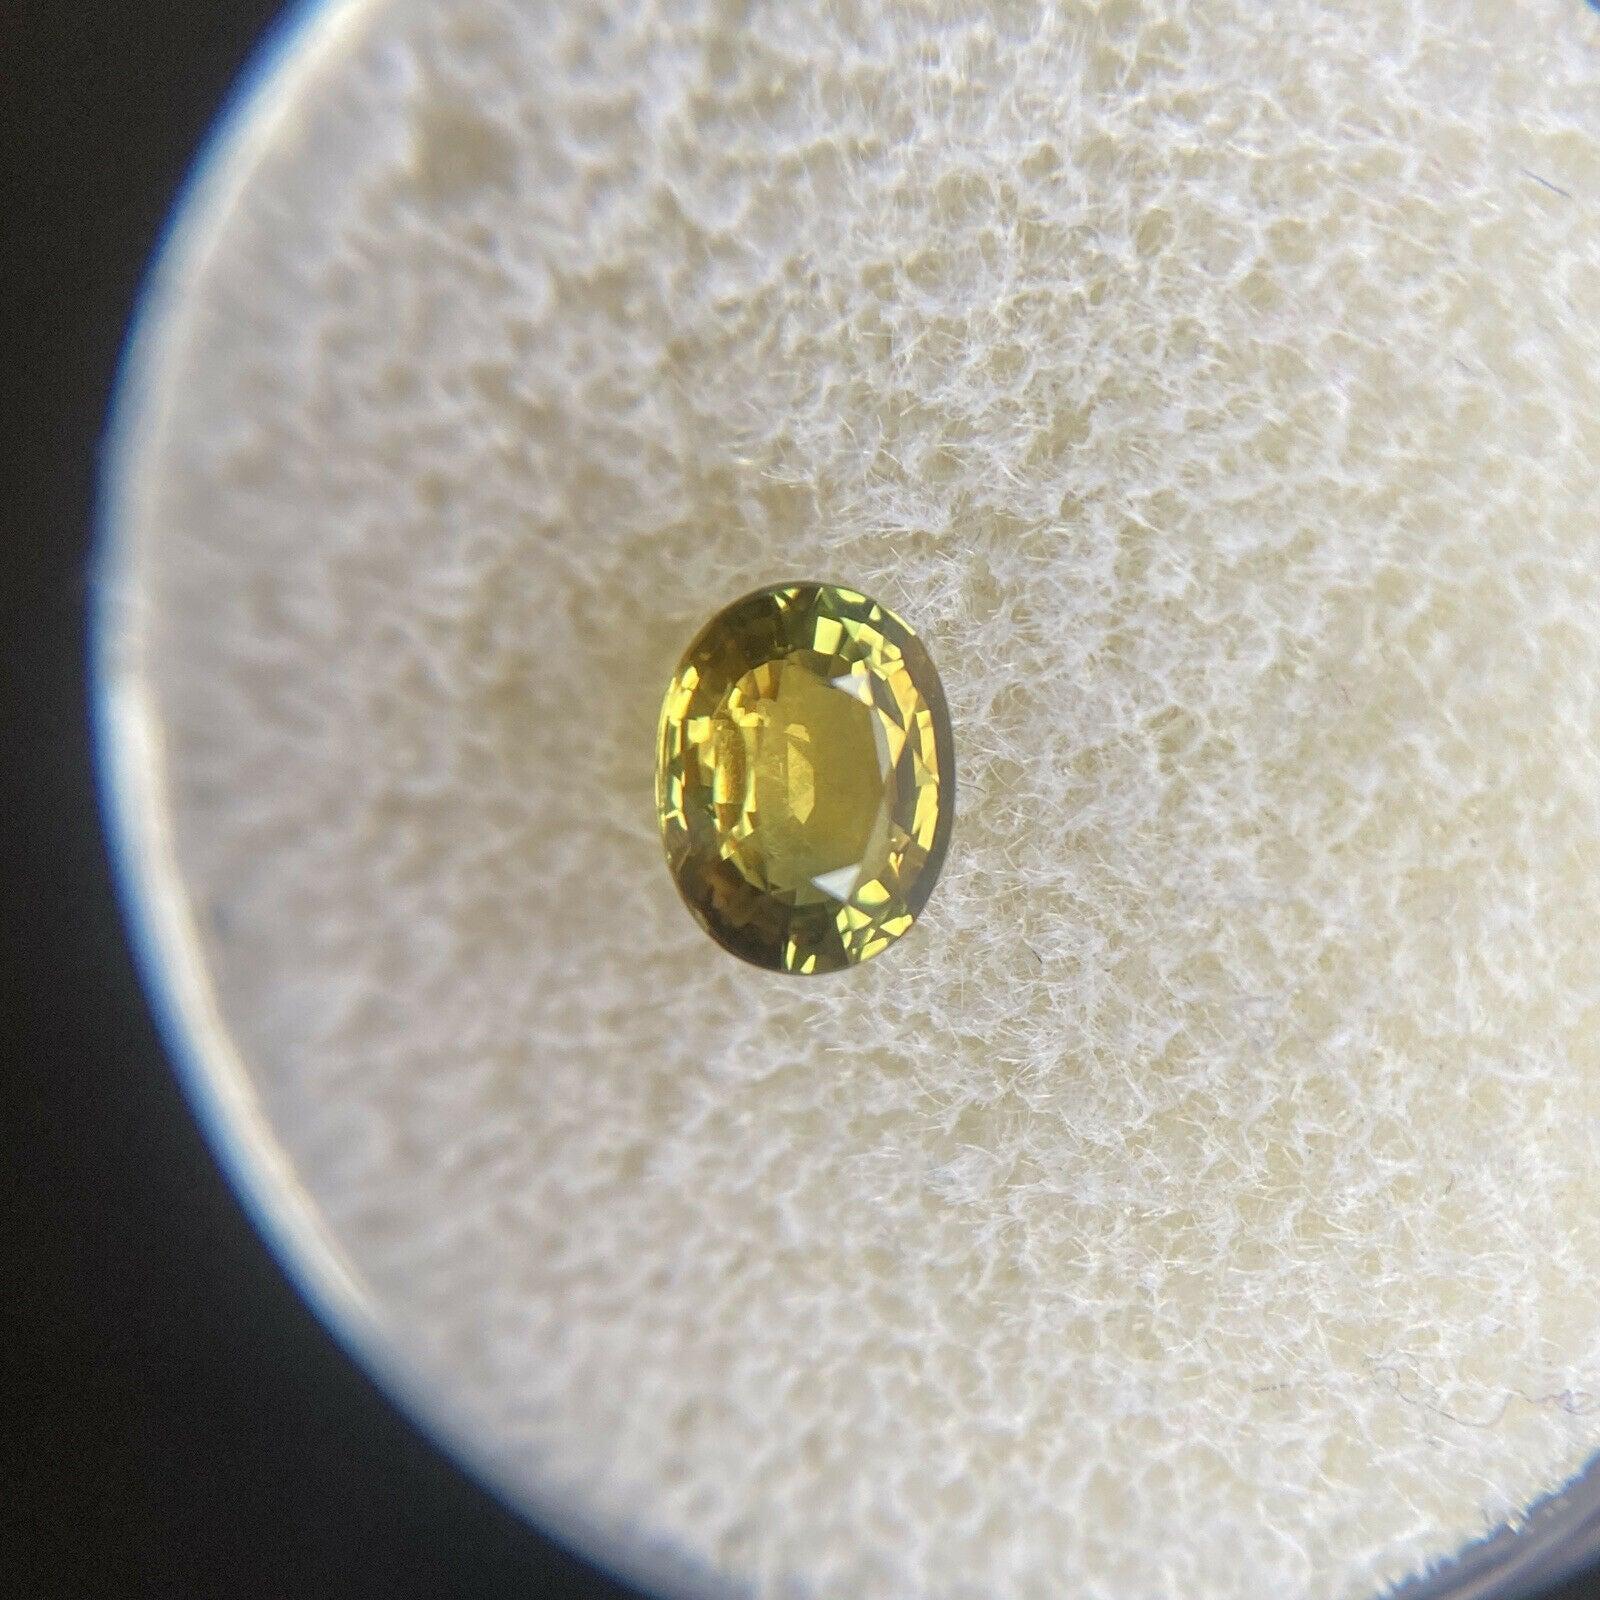 Vivid Green Yellow Untreated Sapphire 0.68ct Oval Cut Untreated 5.8 x 4.4mm Gem

Natural Greenish Yellow Sapphire Gemstone. 
0.68 Carat with a beautiful vivid green yellow colour and very good oval cut. Also has excellent clarity, very clean stone.